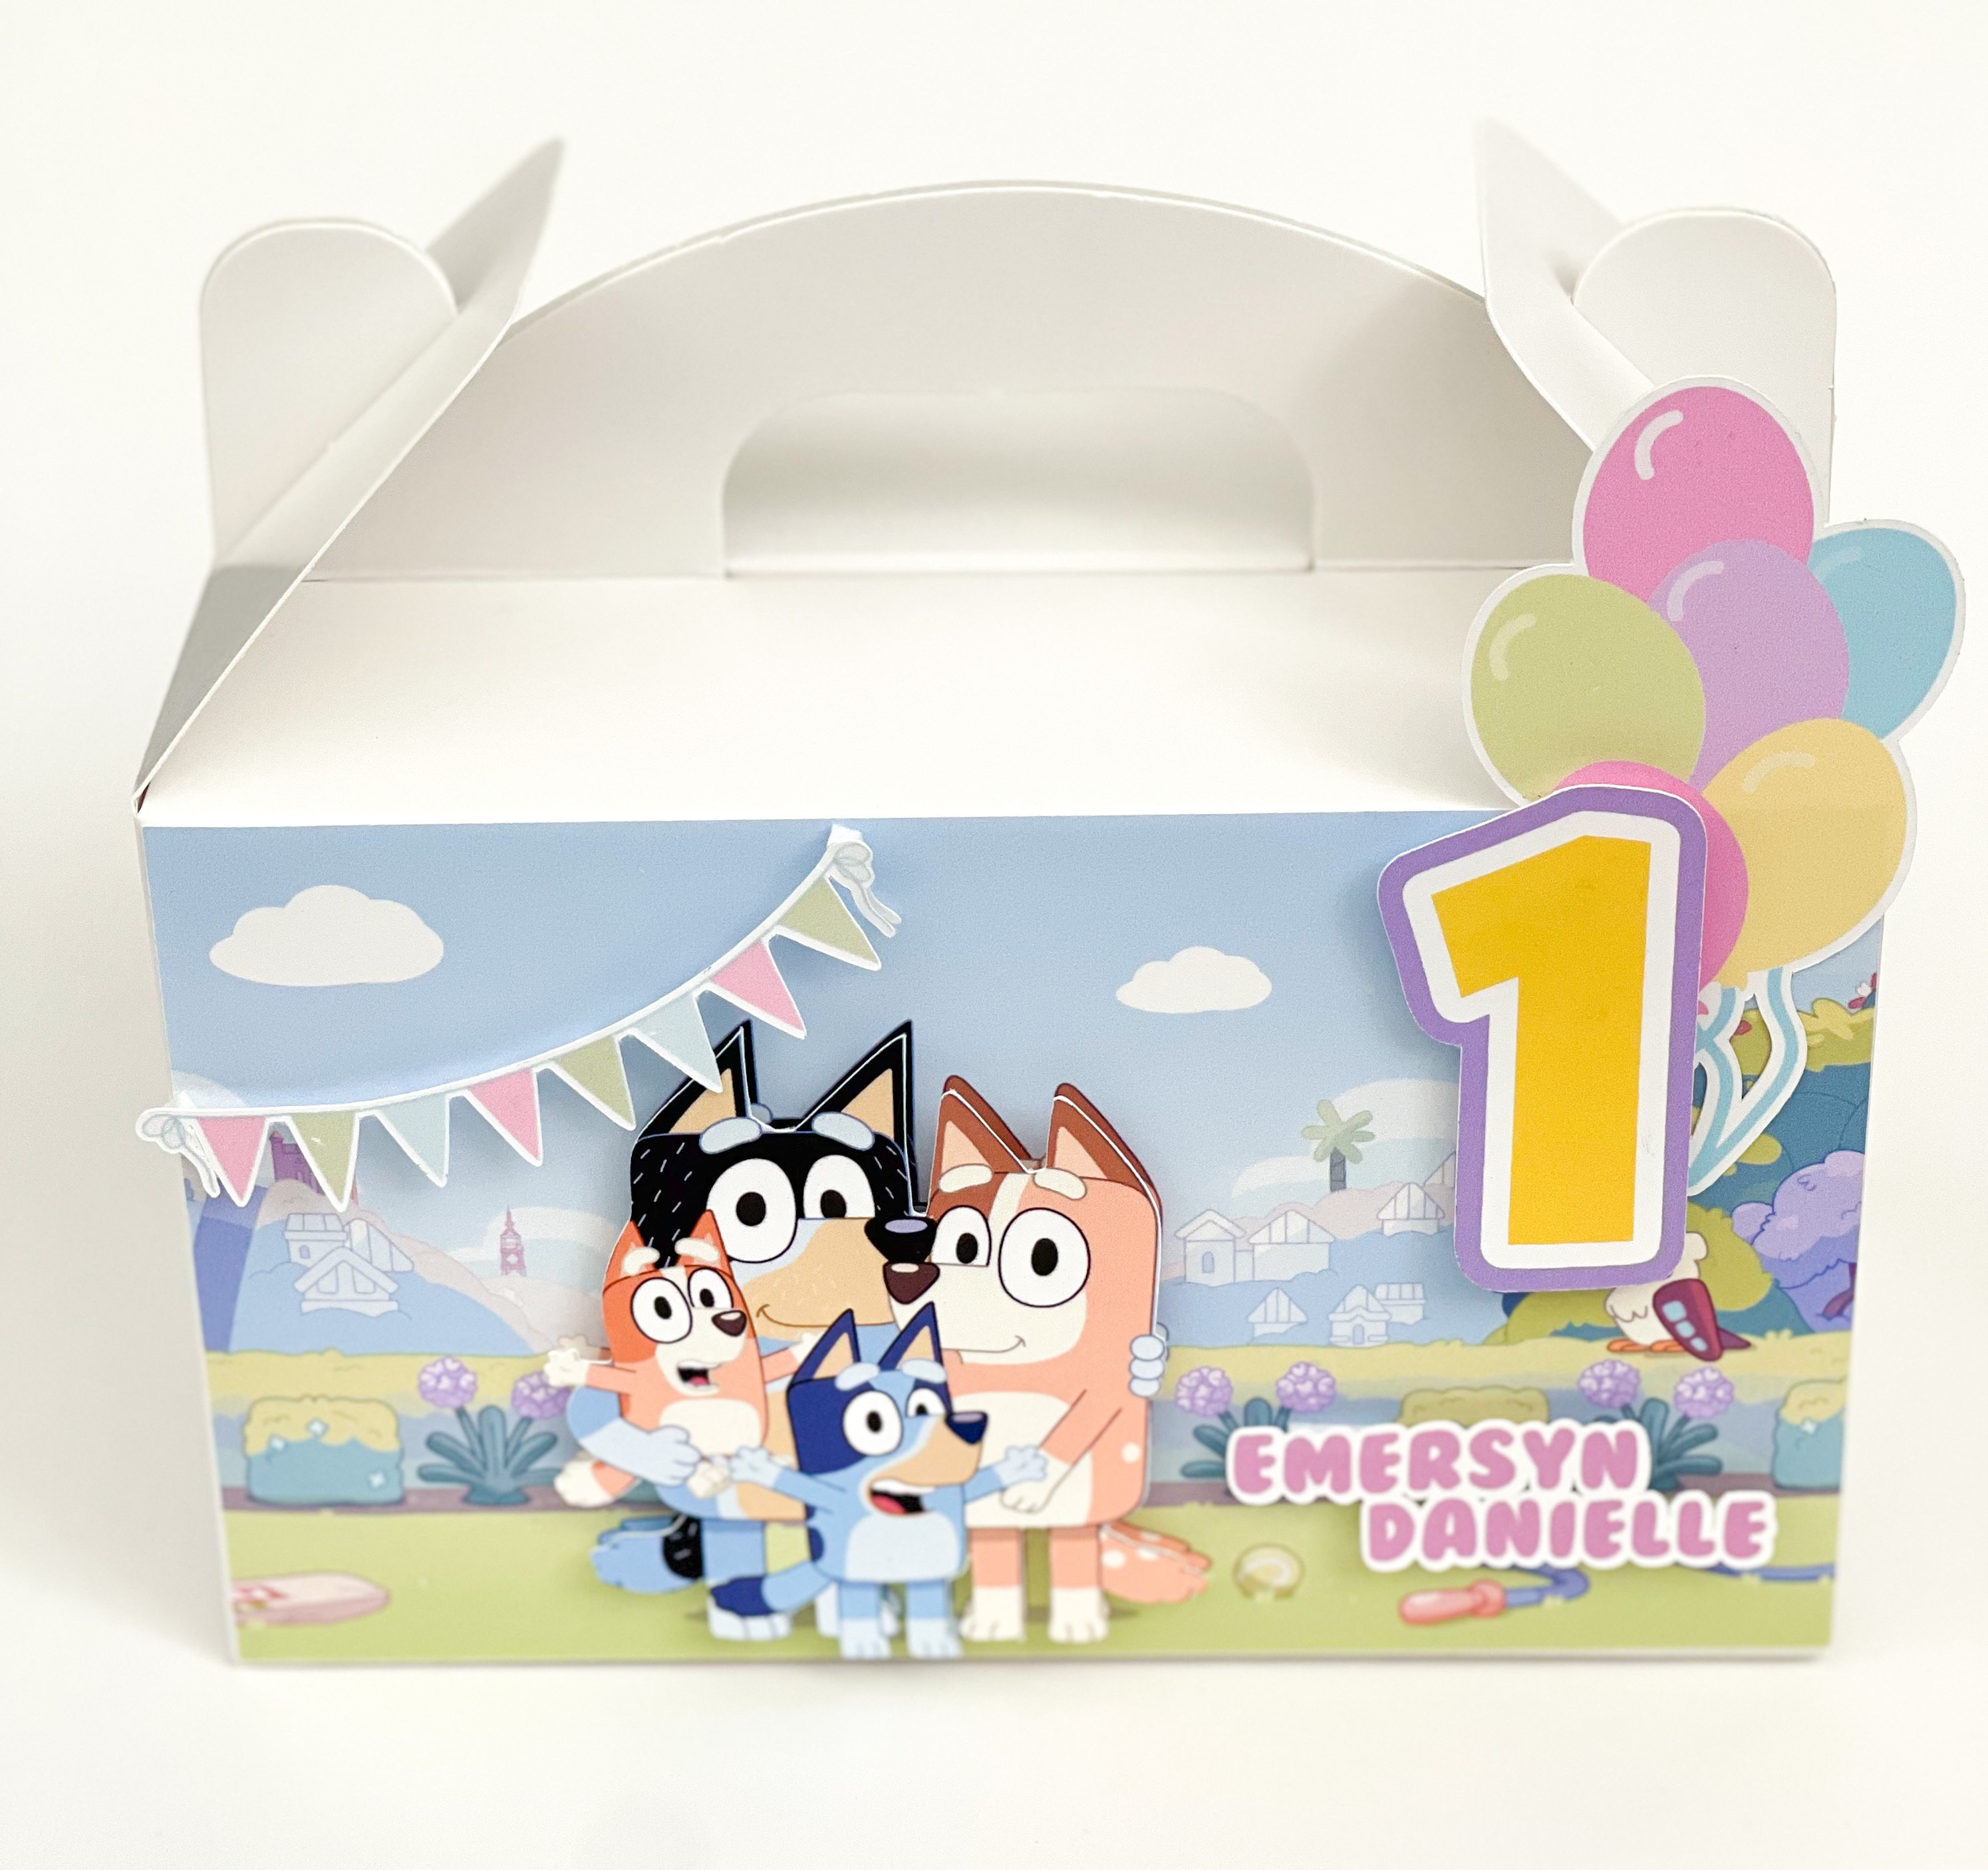 BLUEY STANDARD PERSONALISED PARTY BOX